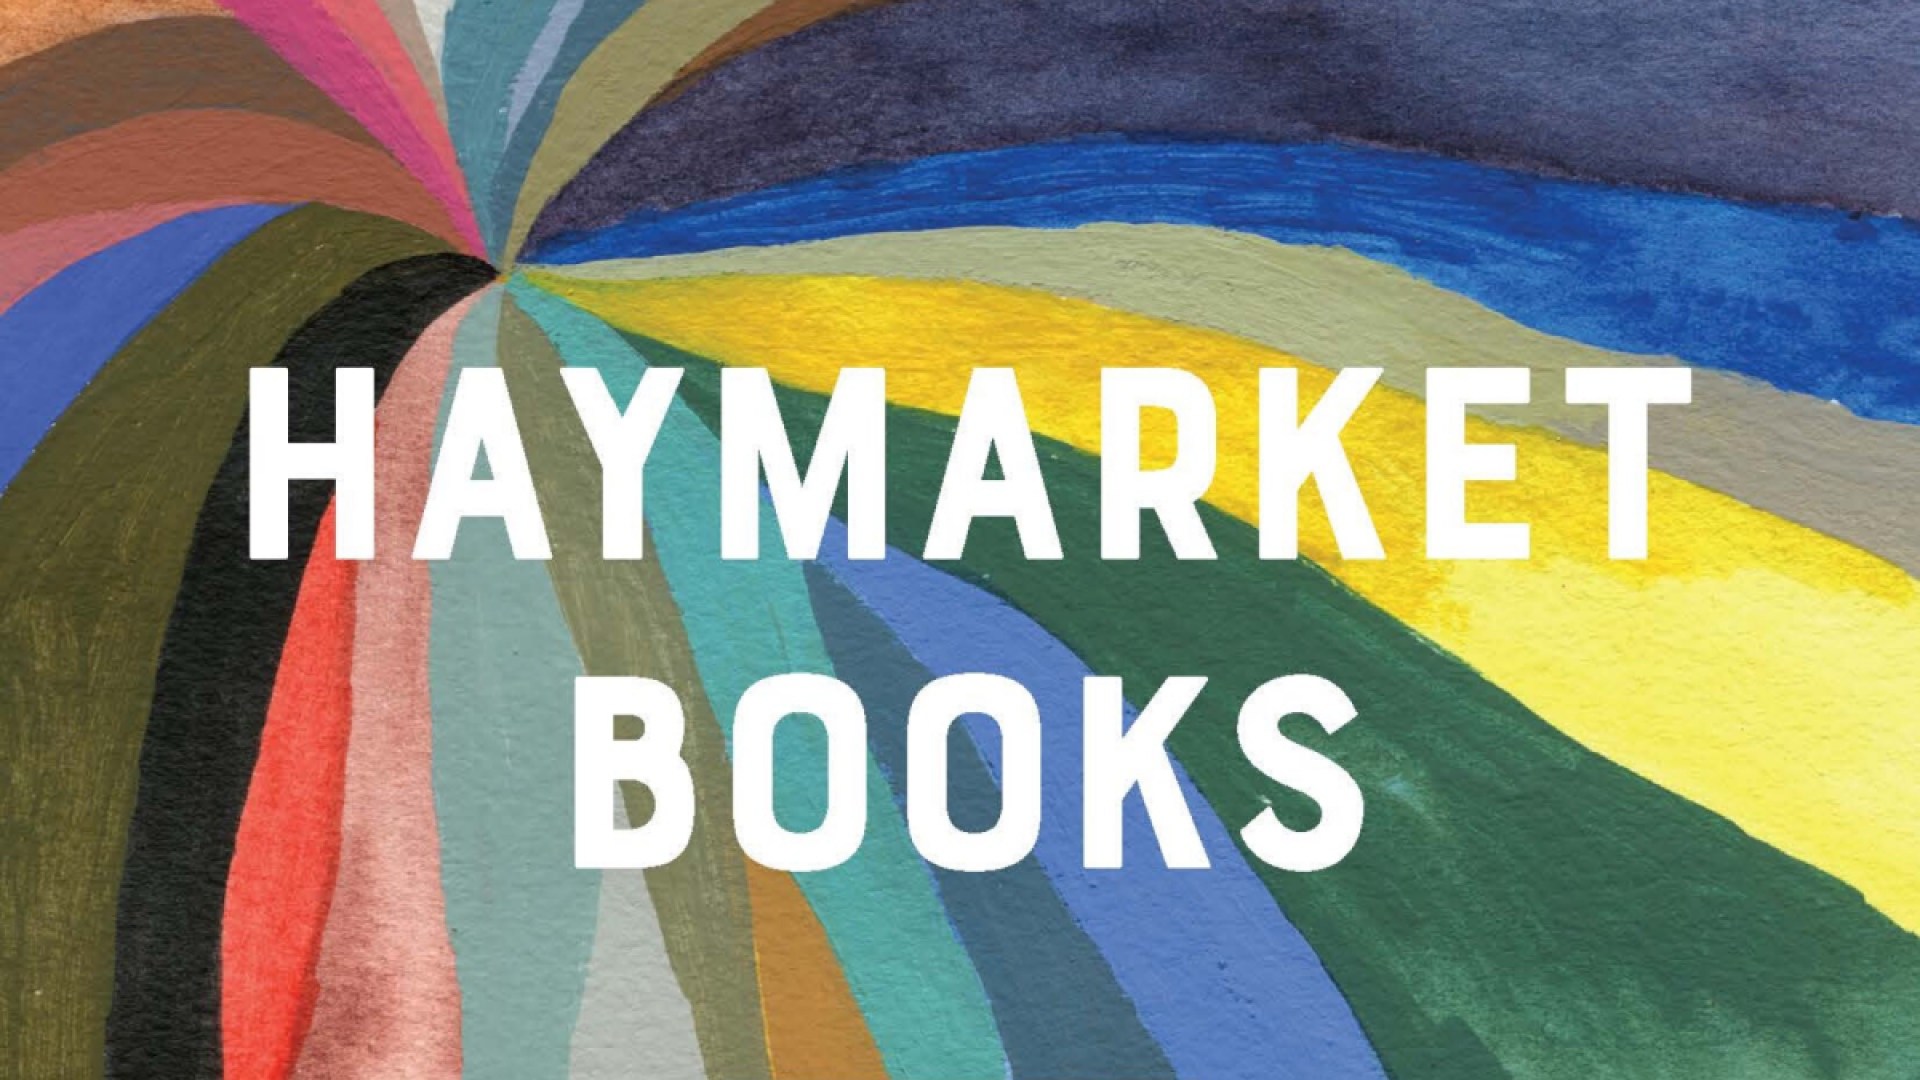 The logo for indie publisher Haymarket Books.